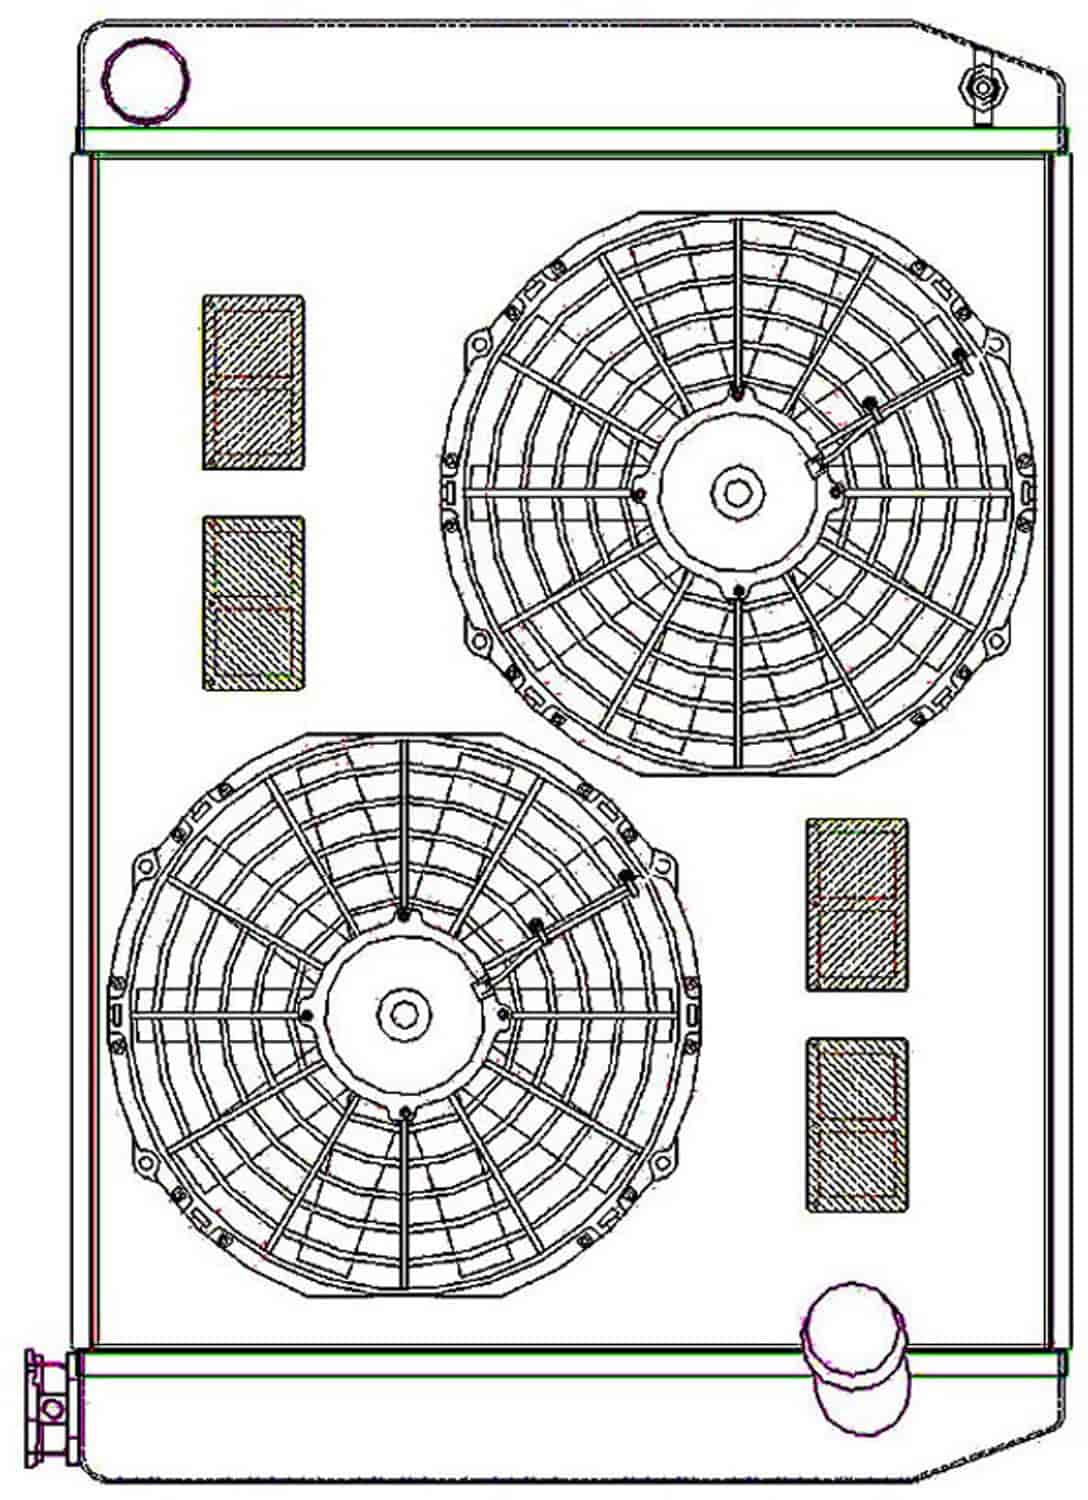 ClassicCool ComboUnit Universal Fit Radiator and Fan Single Pass Crossflow Design 27.50" x 19" with No Options